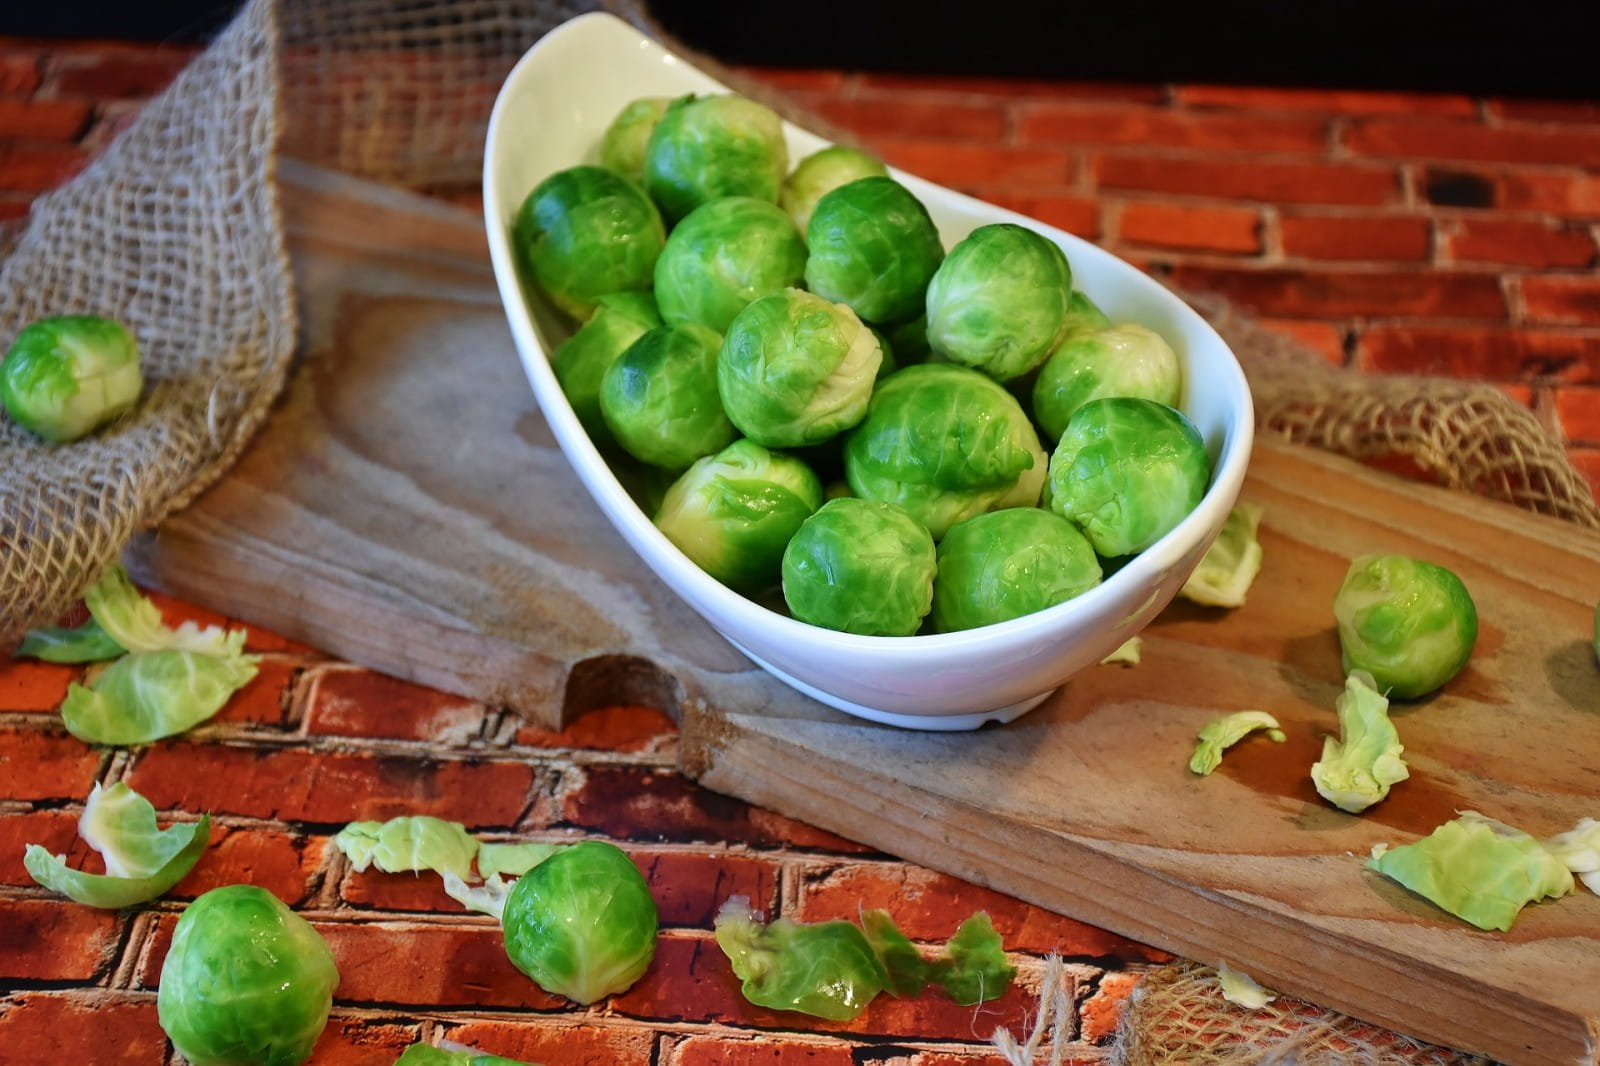 8 great wine matches for brussels sprouts